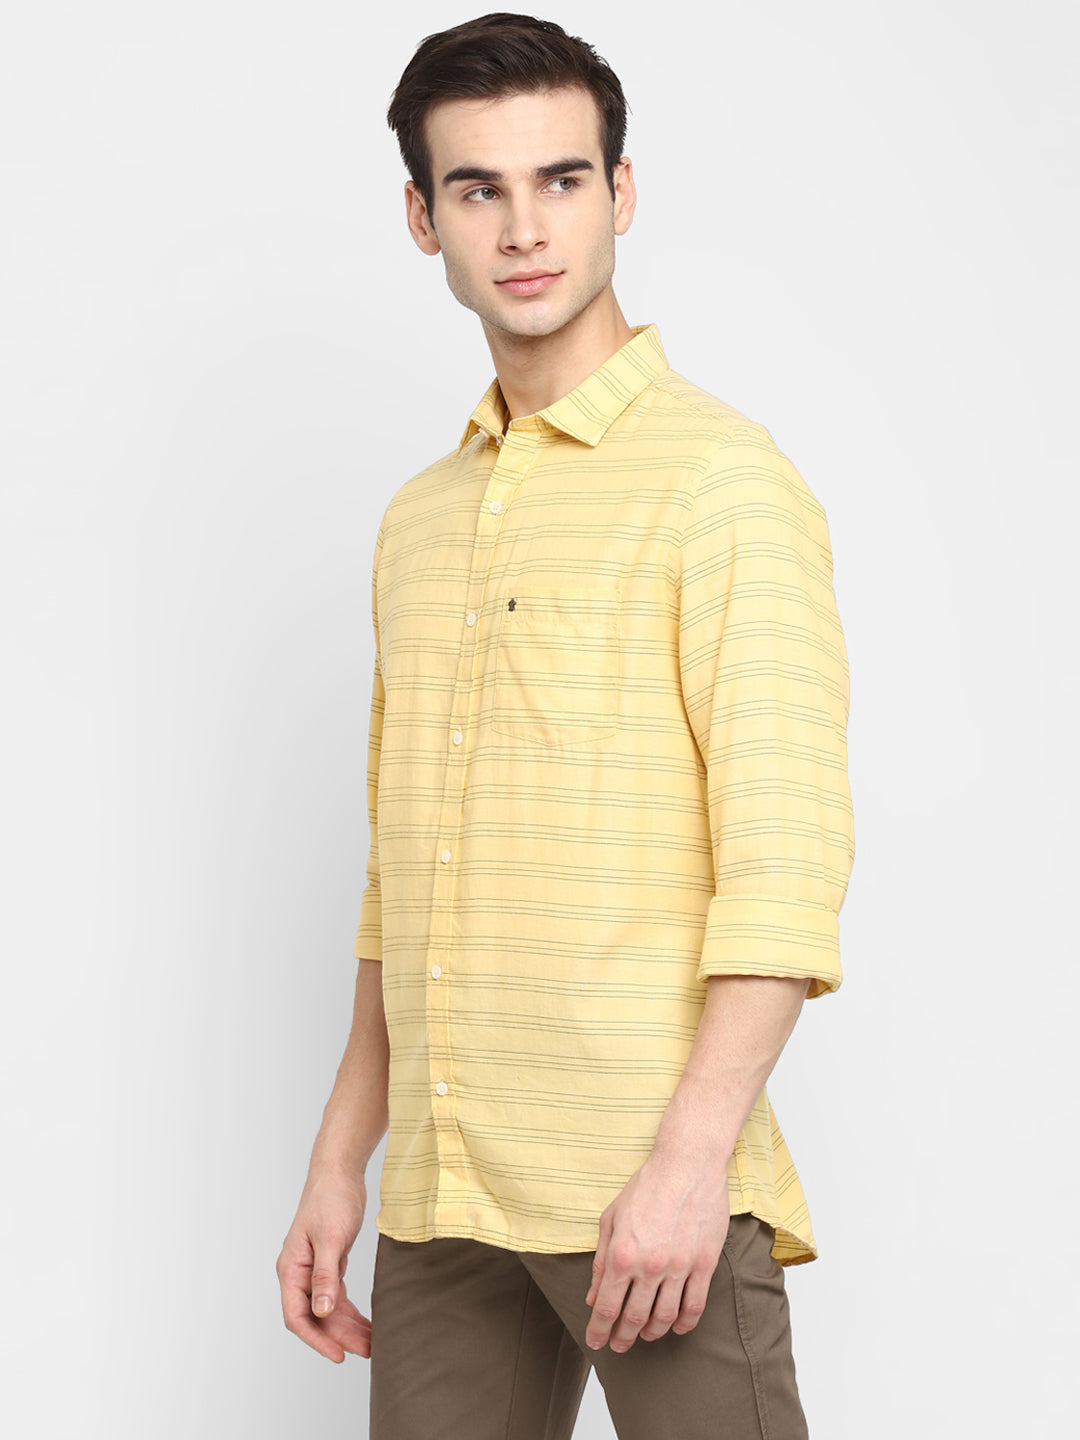 Stiped Yellow Slim Fit Casual Shirt For Men